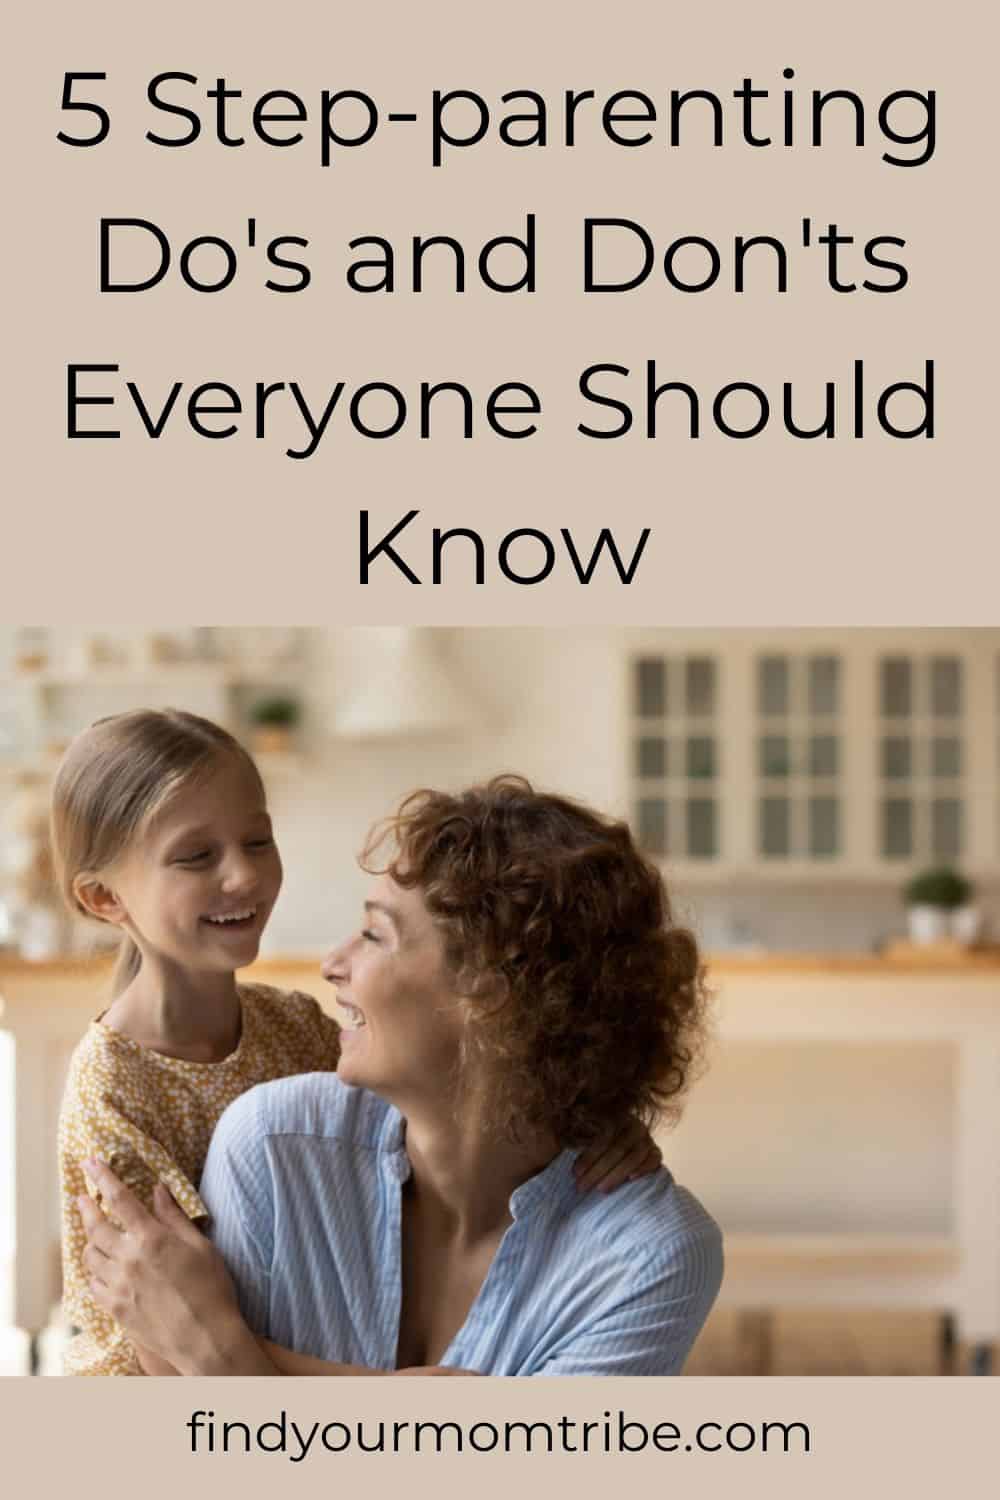 Pinterest step-parenting dos and donts 